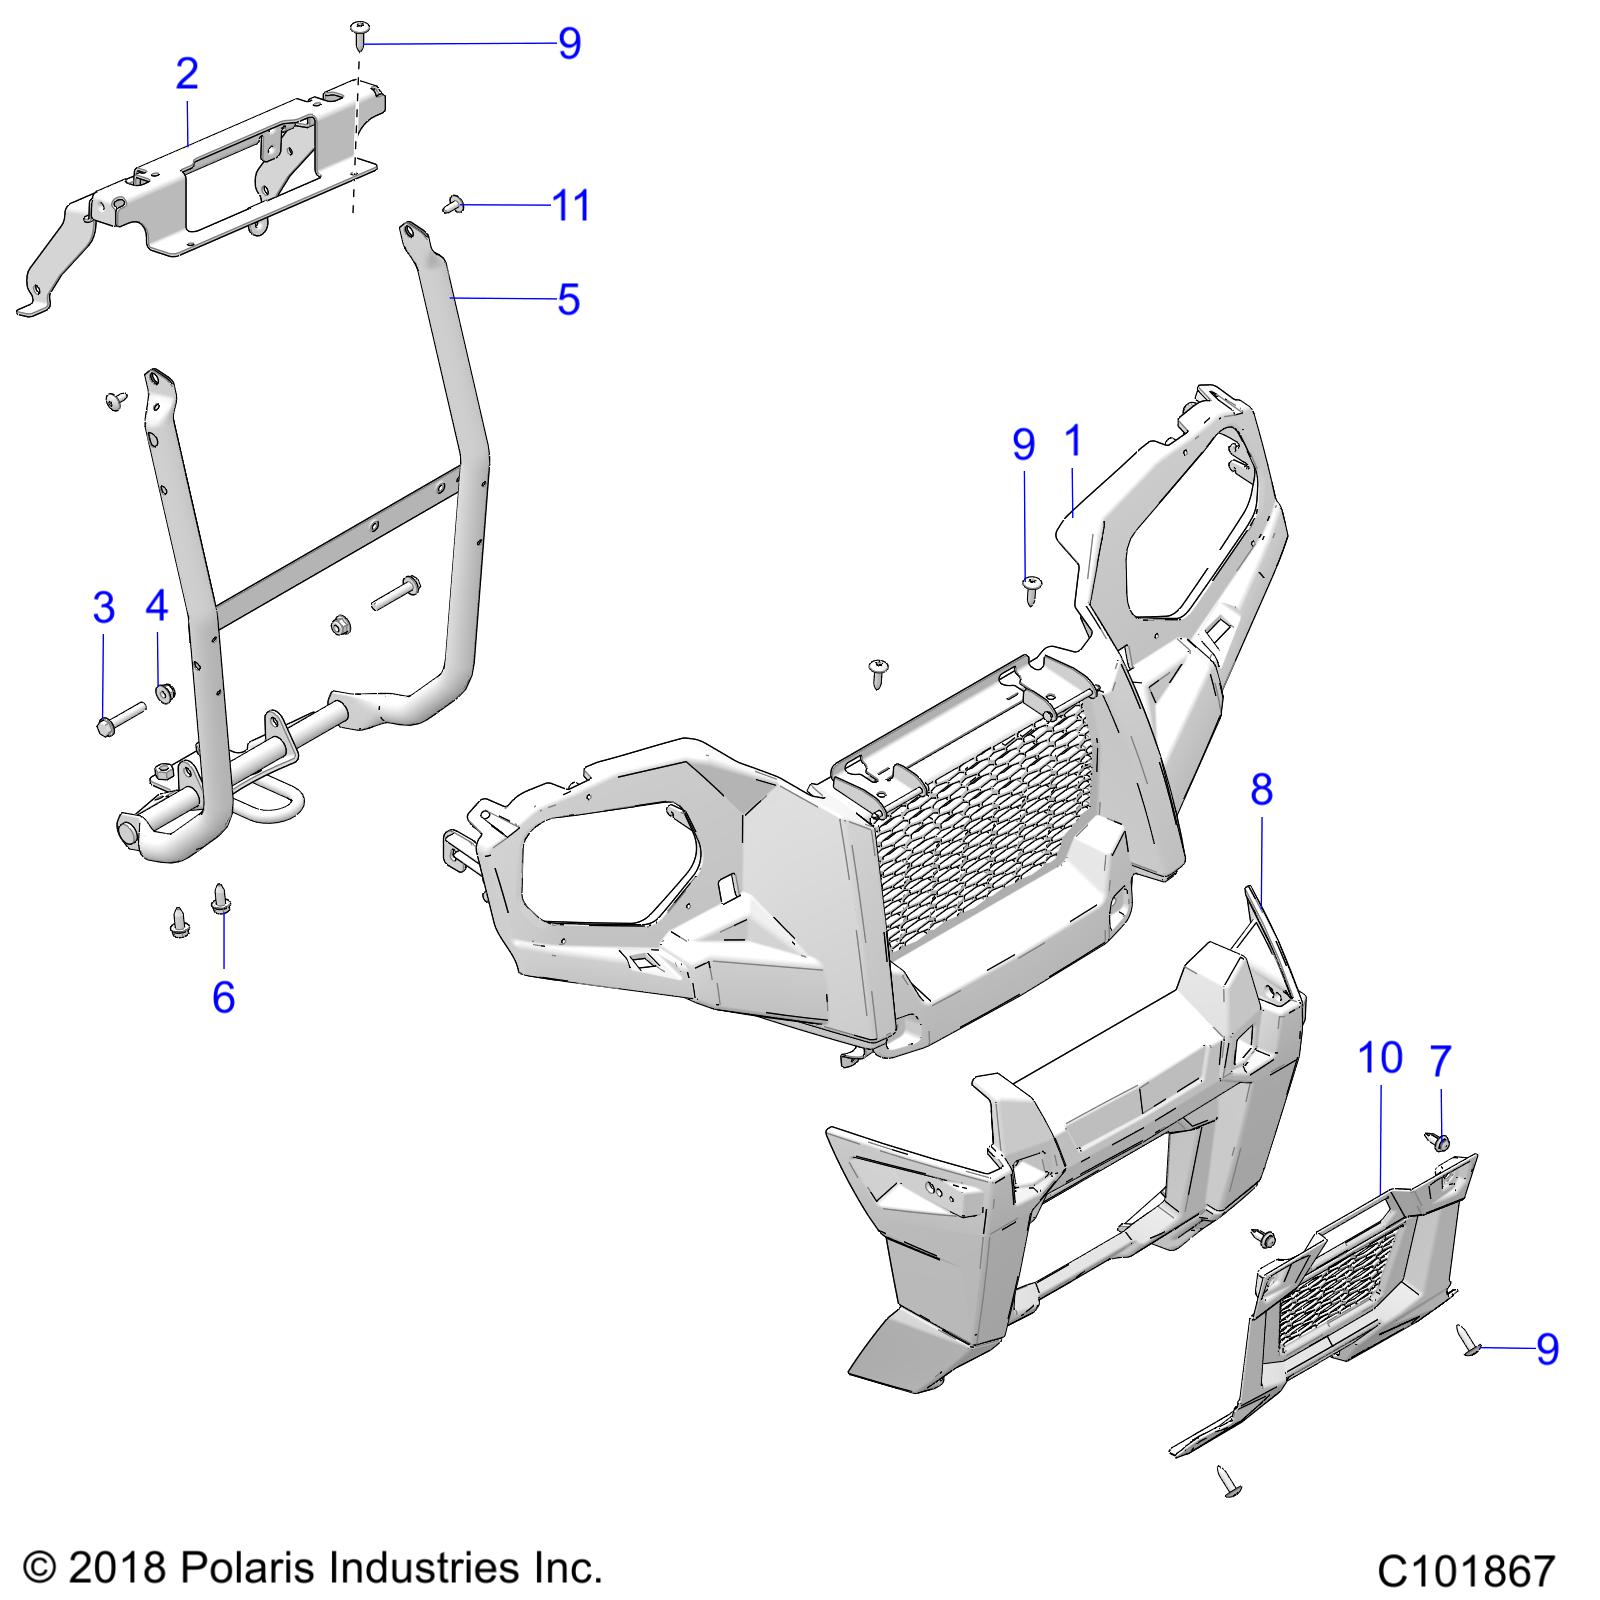 BODY, FRONT BUMPER and MOUNTING - A19SDE57F1/SDA57F1 (C101867)